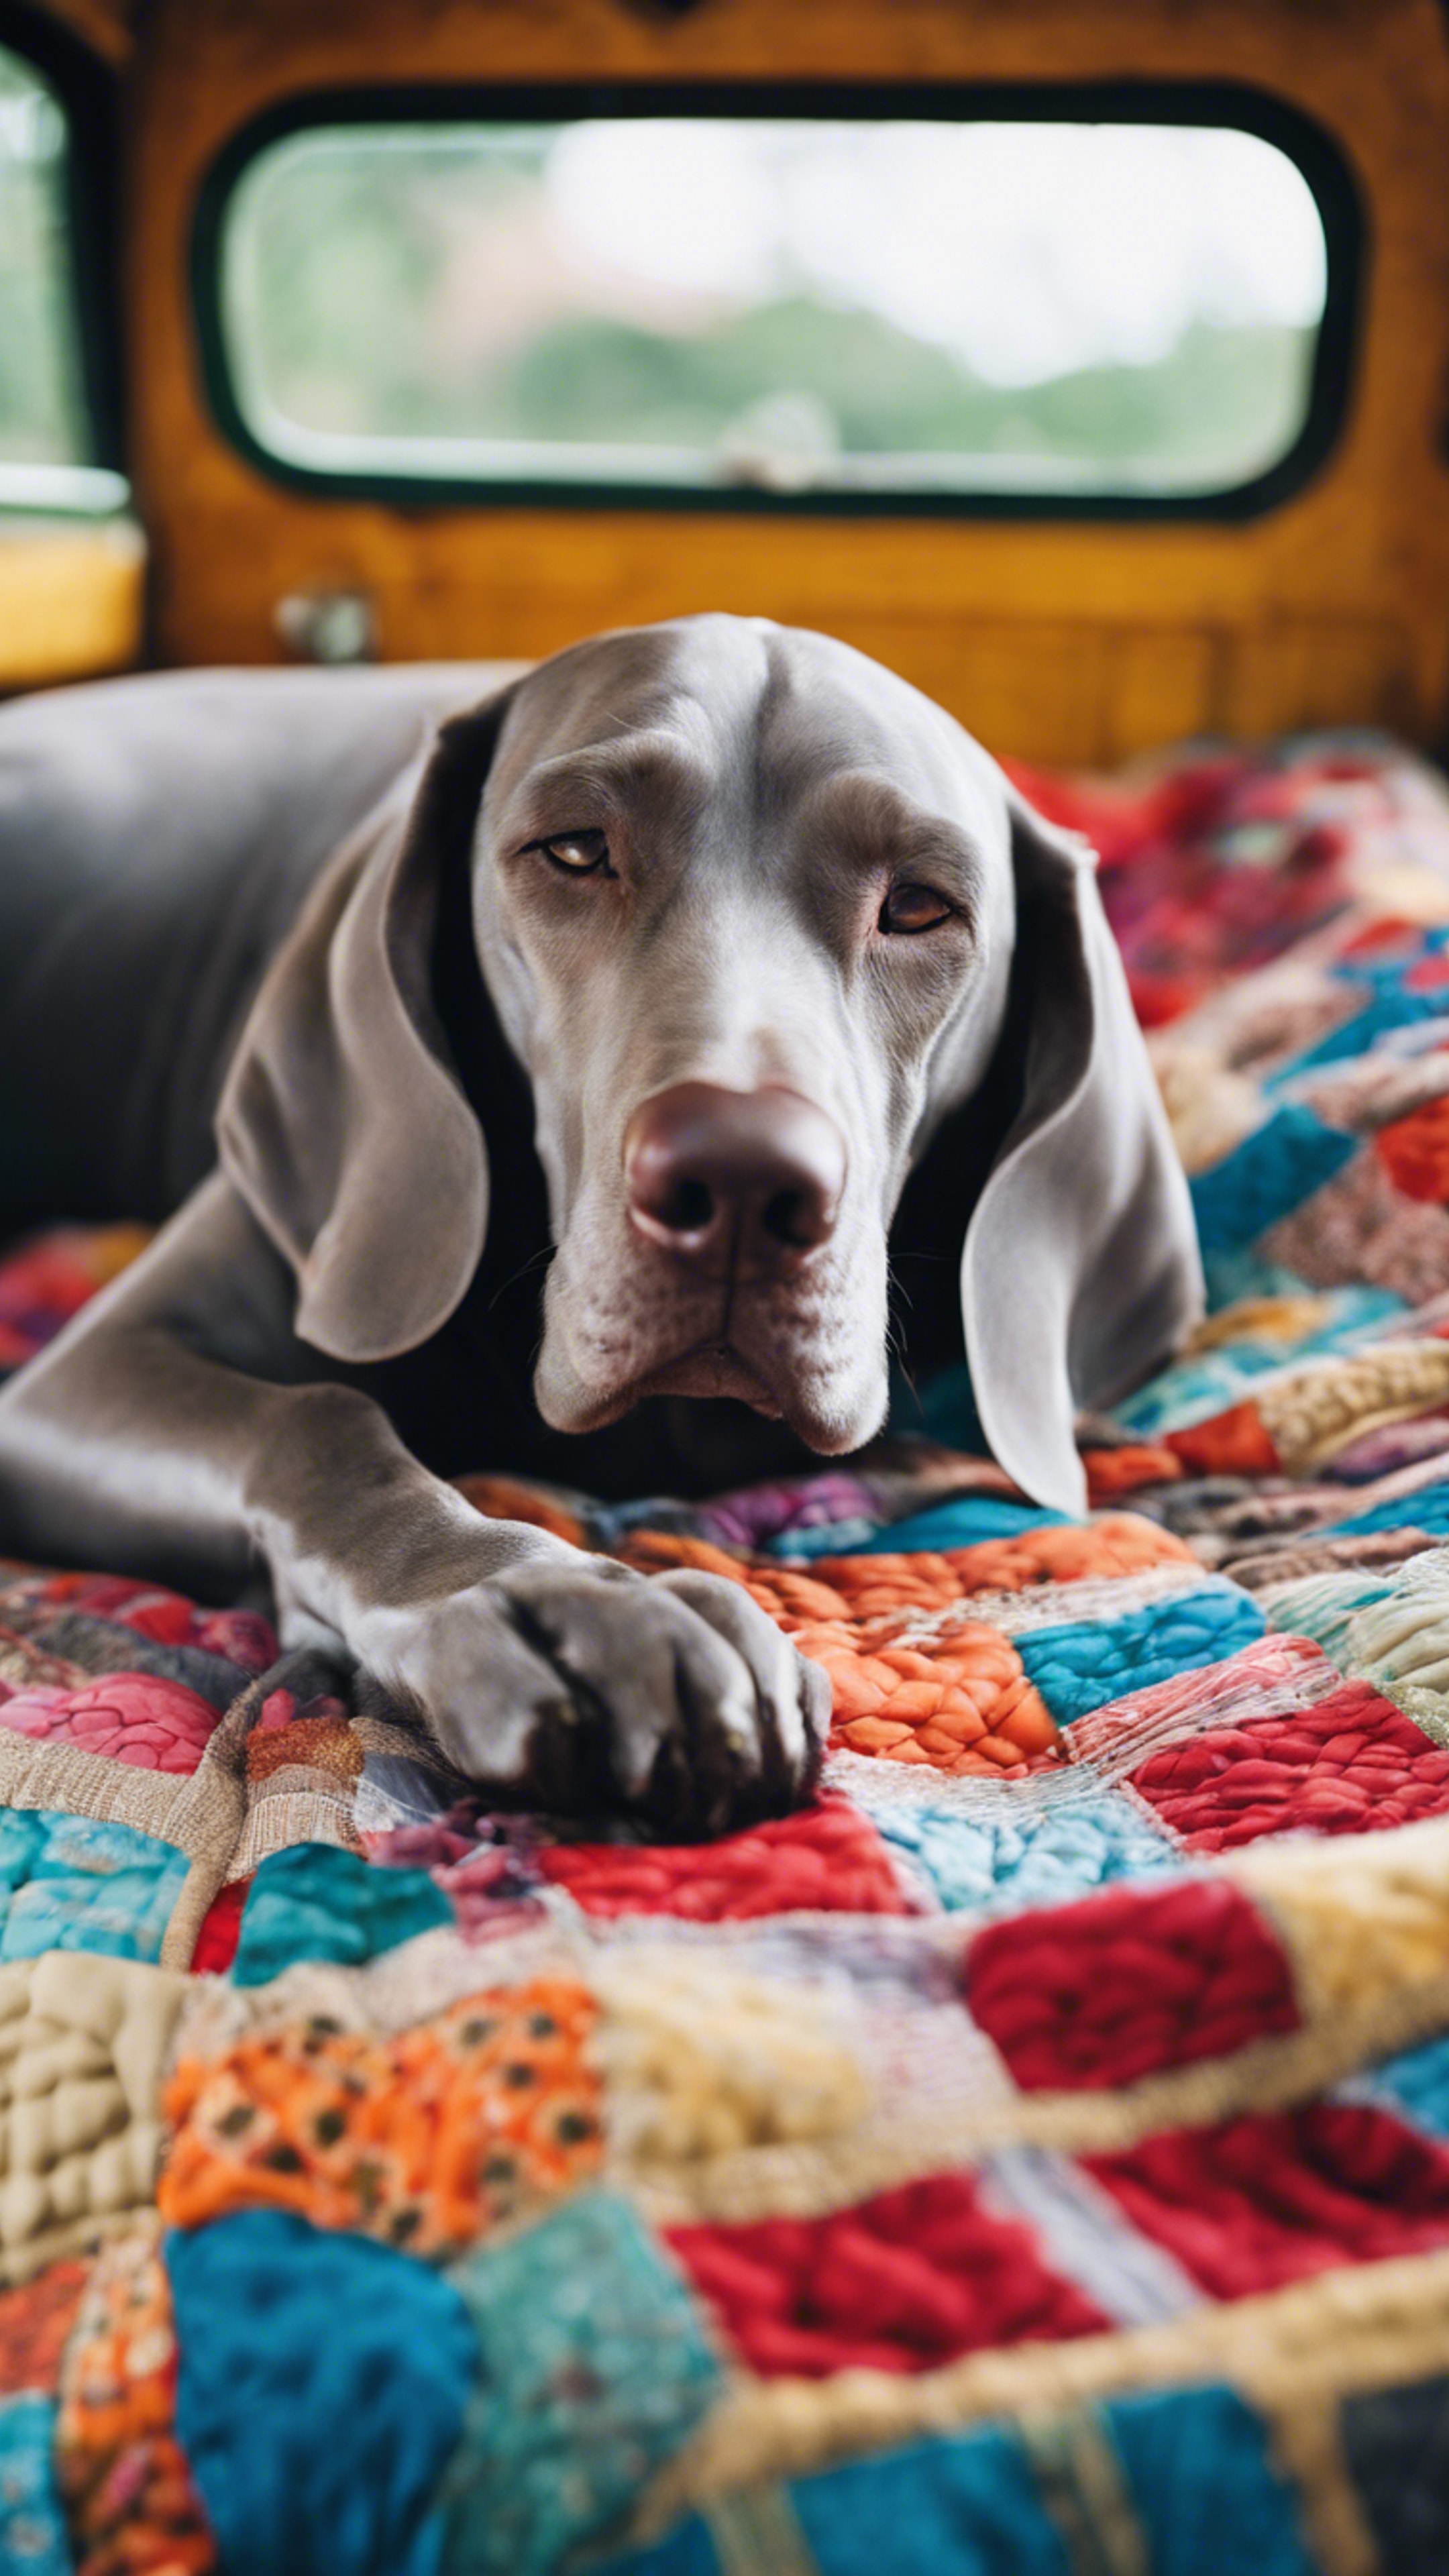 A sleepy Weimaraner lying in the back of a vintage truck bed, covered with a colorful patchwork quilt. Tapet[392368d8c78049ac8a4f]